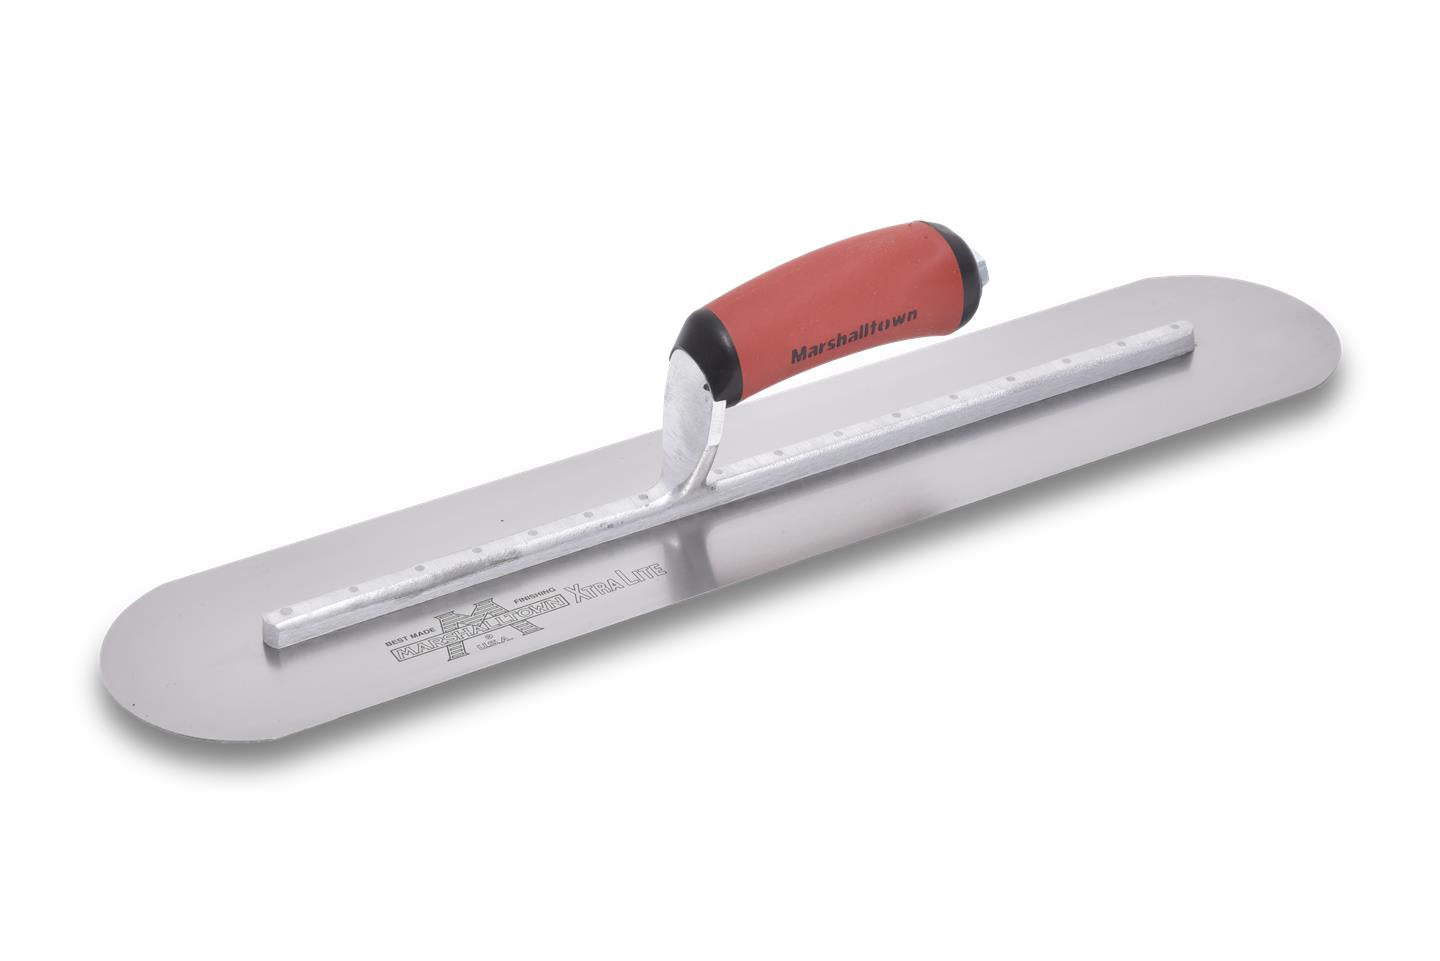 Marshalltown 13527 20 X 4 Finishing Trowel-Fully Rounded Curved DuraSoft Handle